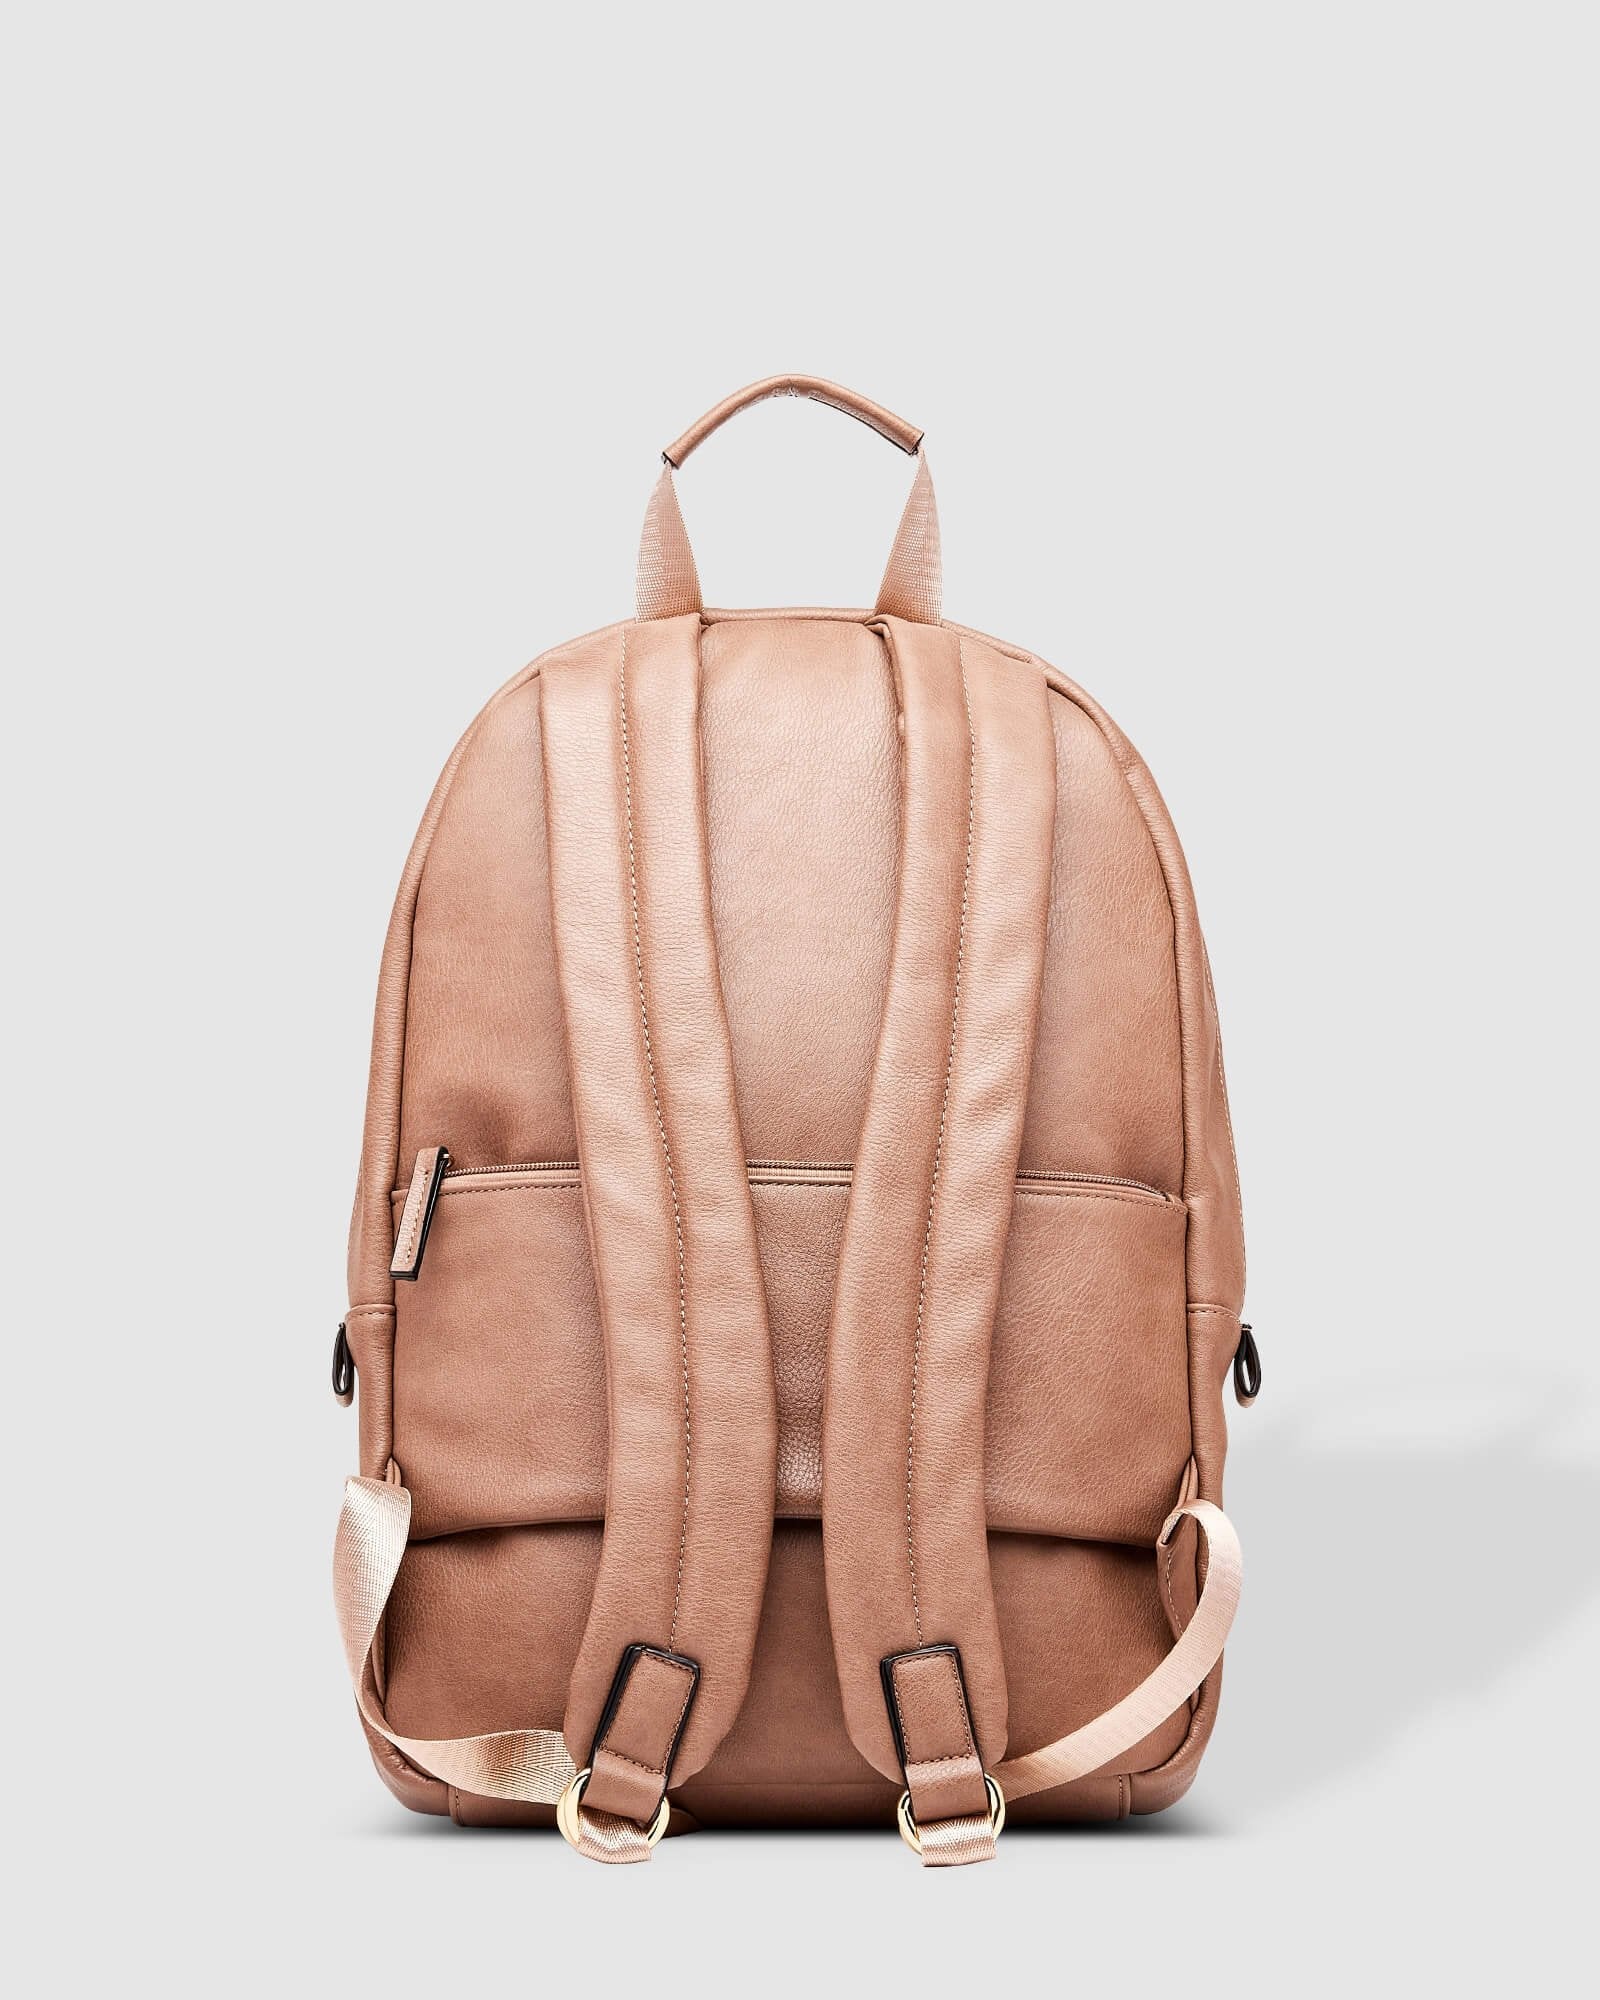 Louenhide Huxley Backpack - Taupe Accessories - Other Accessories - Handbags & Wallets by Louenhide | Grace the Boutique